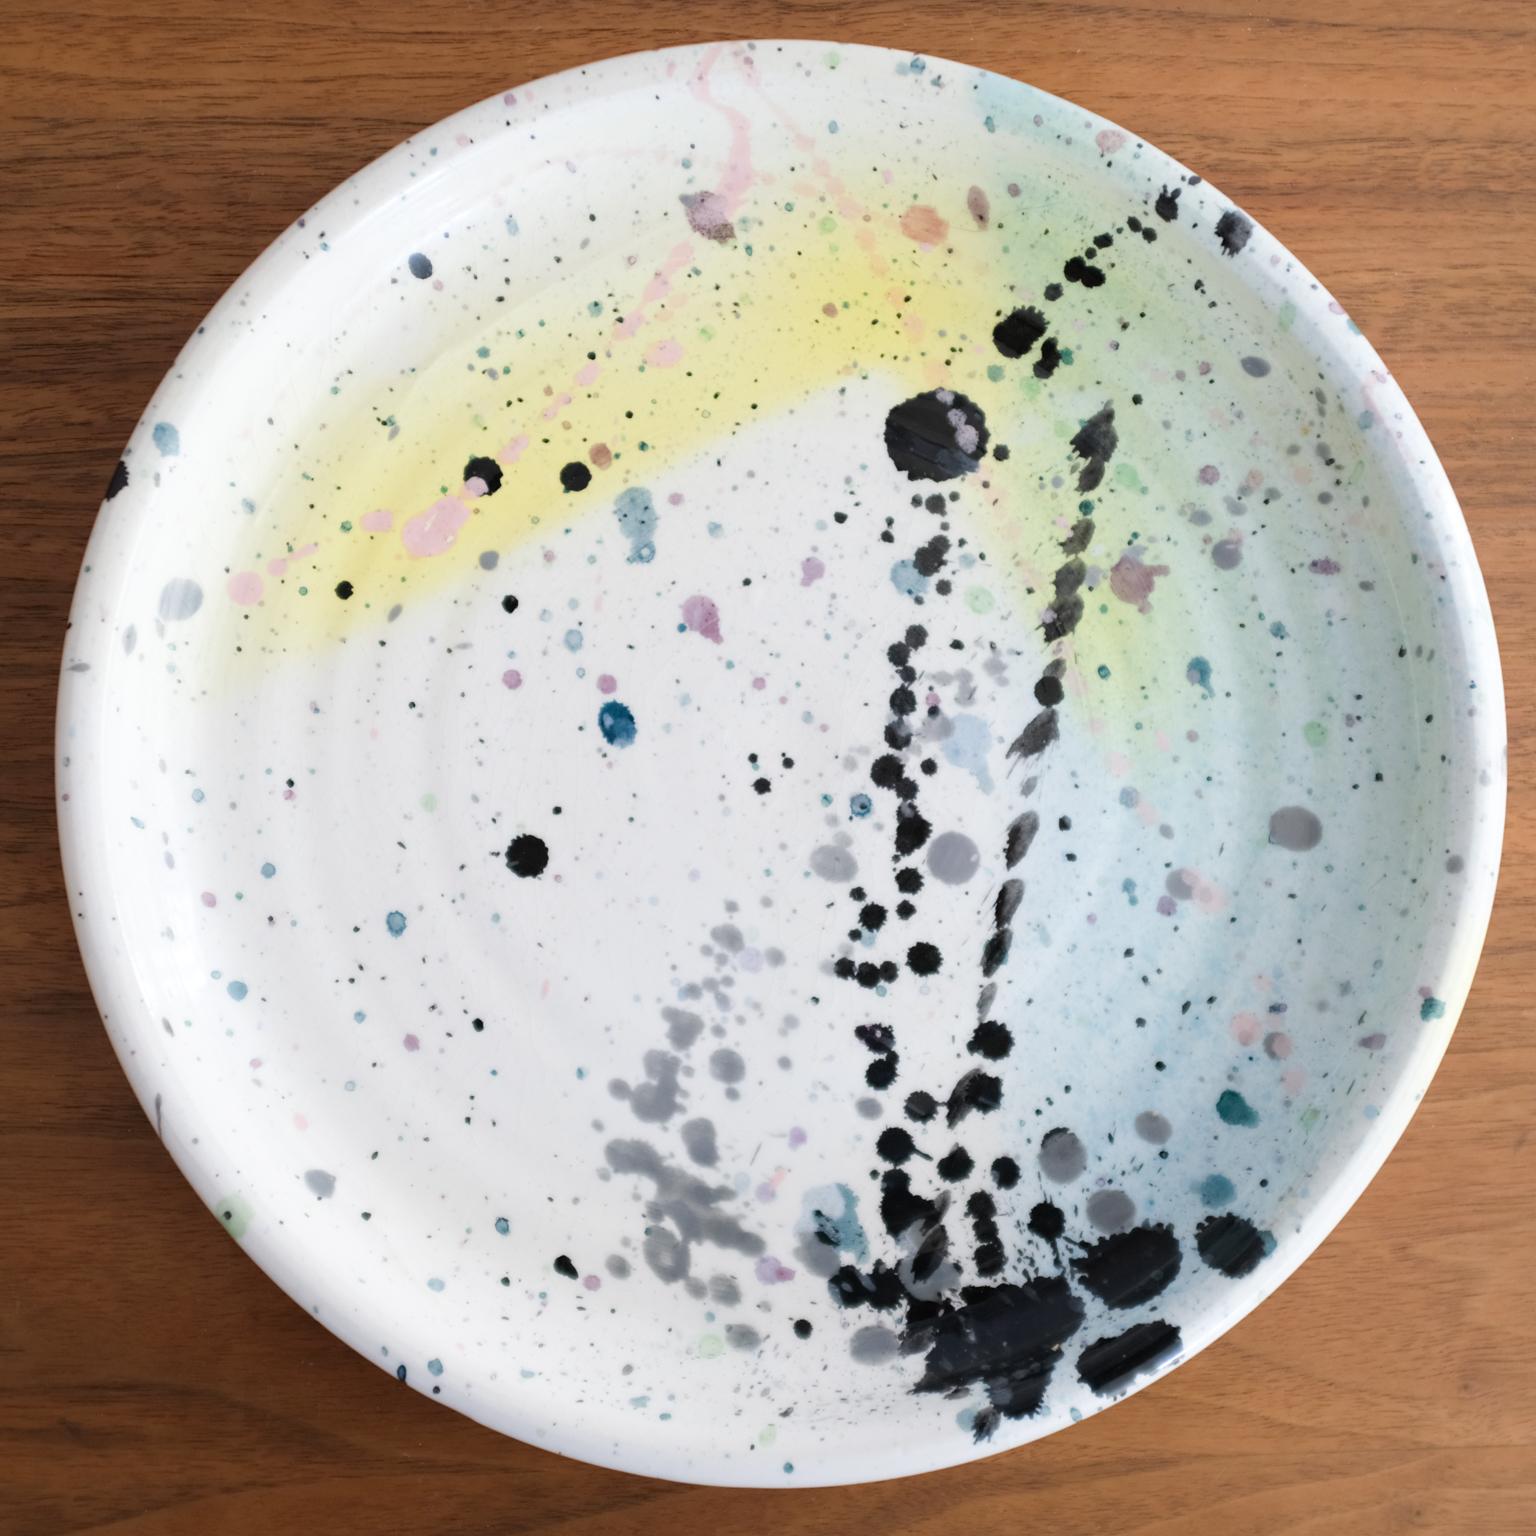 Peter Shire ceramic plate from 1980. This is an early work by the Los Angeles-based artist and founding member of The Memphis Group. Signed 